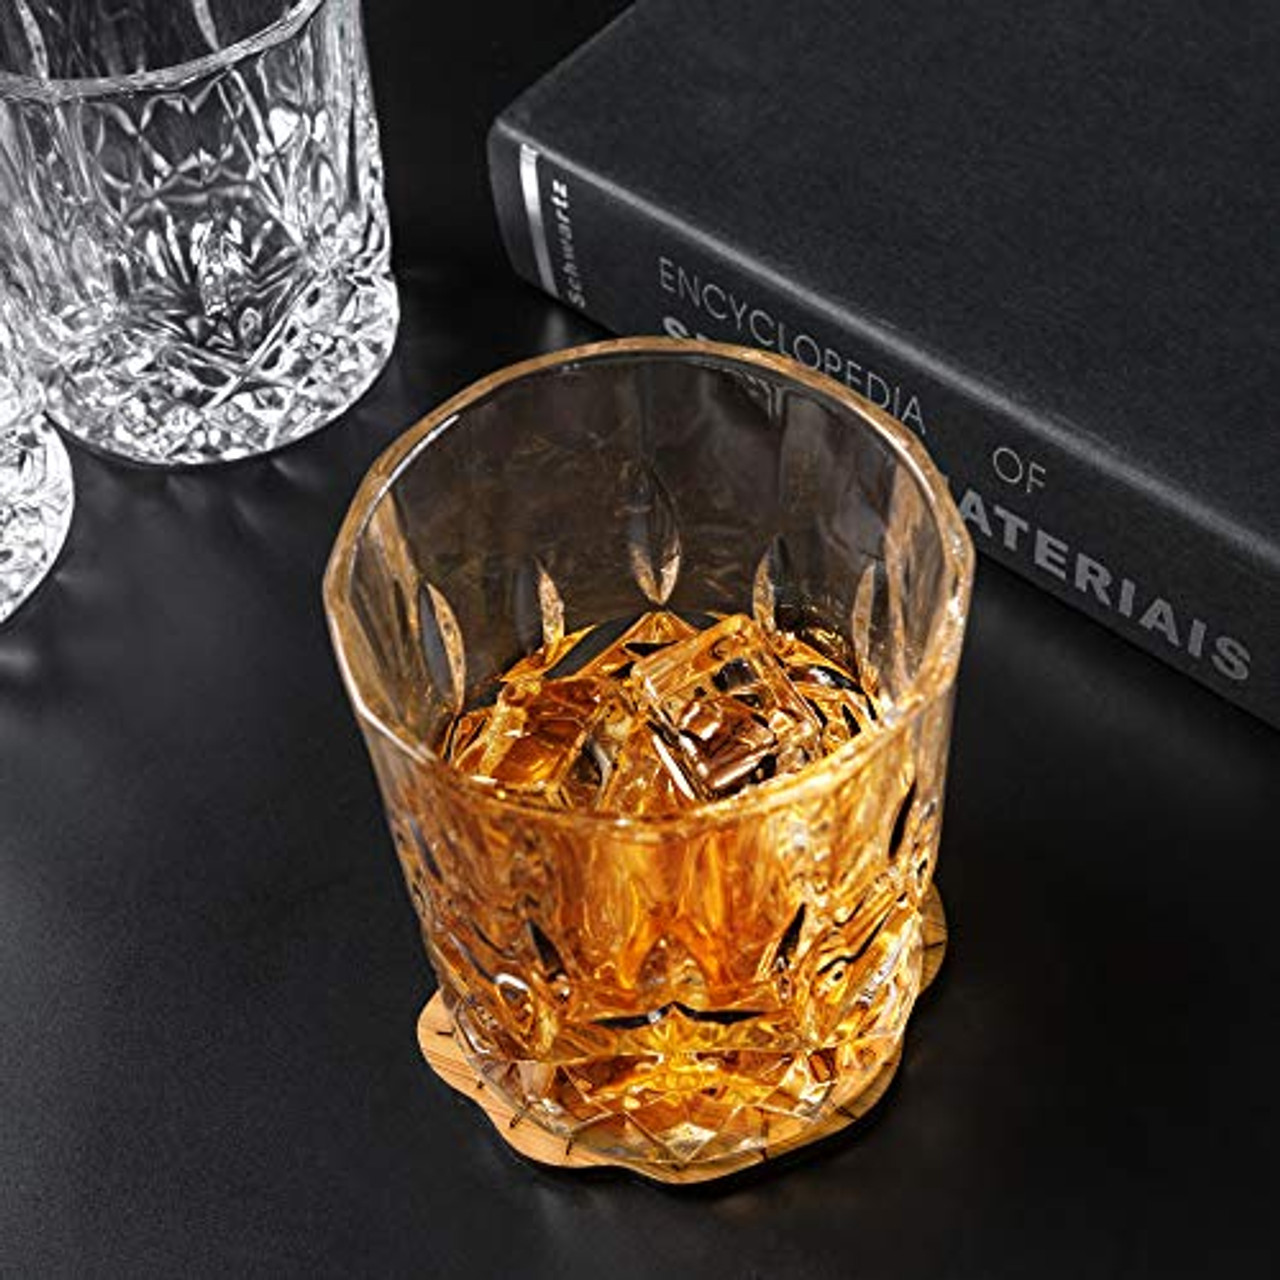 Unique Glassware for Whiskey and Whiskey cocktails 